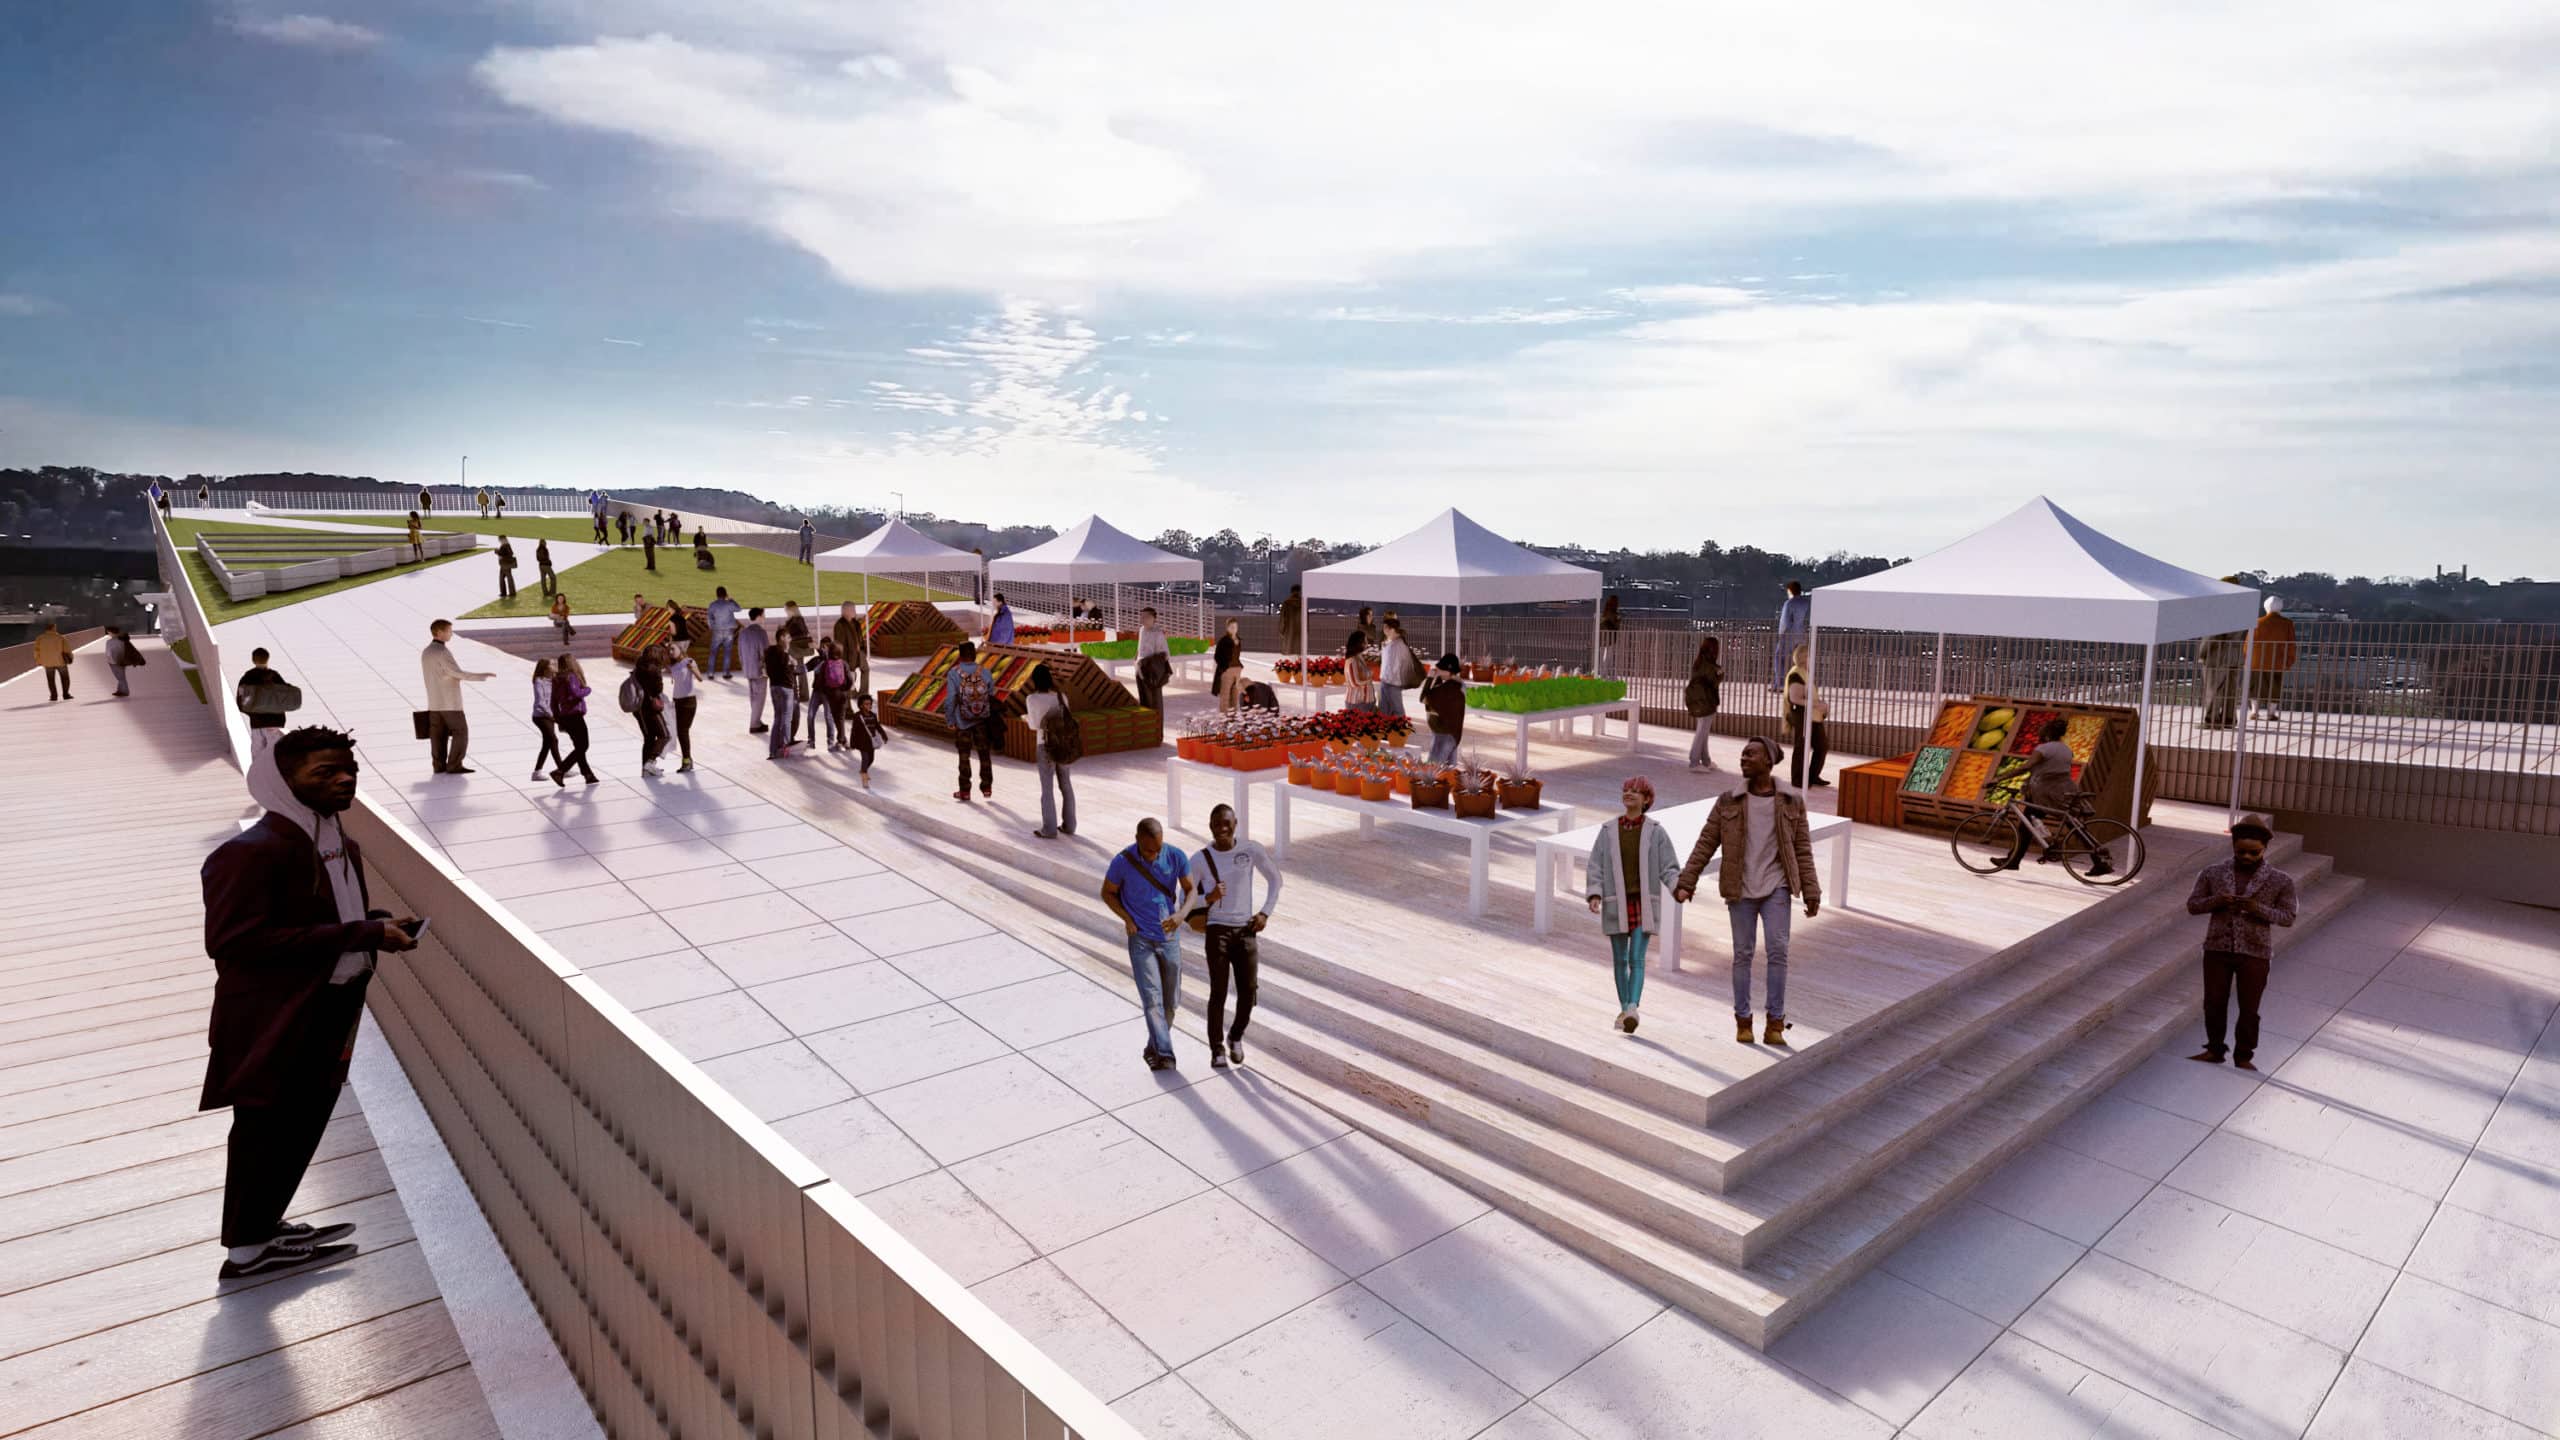 An artist's rendering of a walkway with people on it.